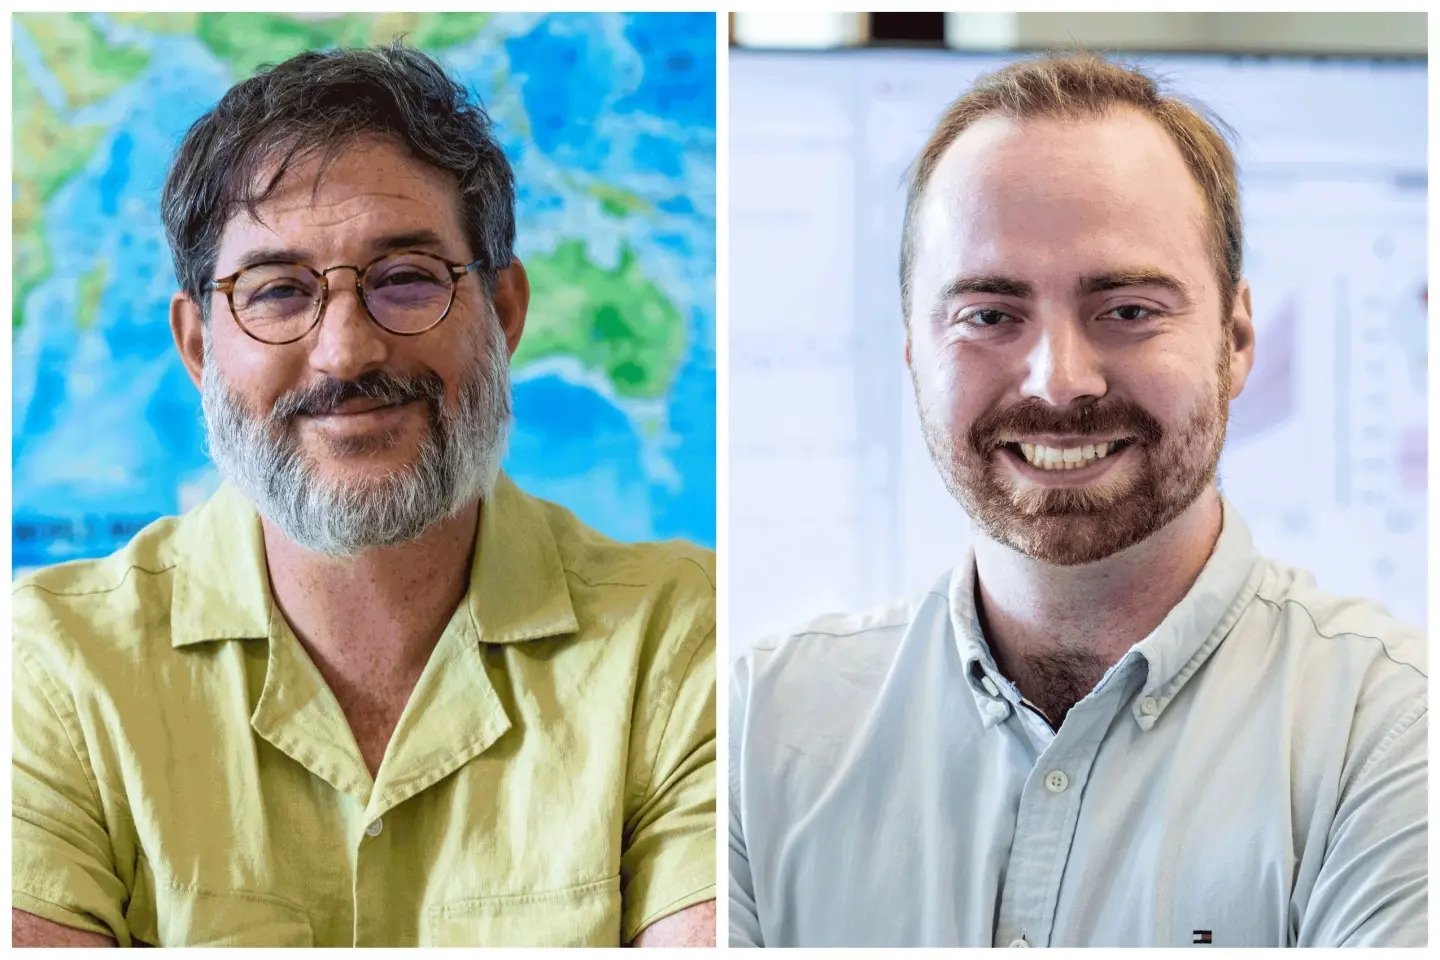 "In Years After El Niño, Global Economy Loses Trillions; Geography professor Justin Mankin, left, and Christopher Callahan, Guarini ’23. (Photos by Lars Blackmore)"